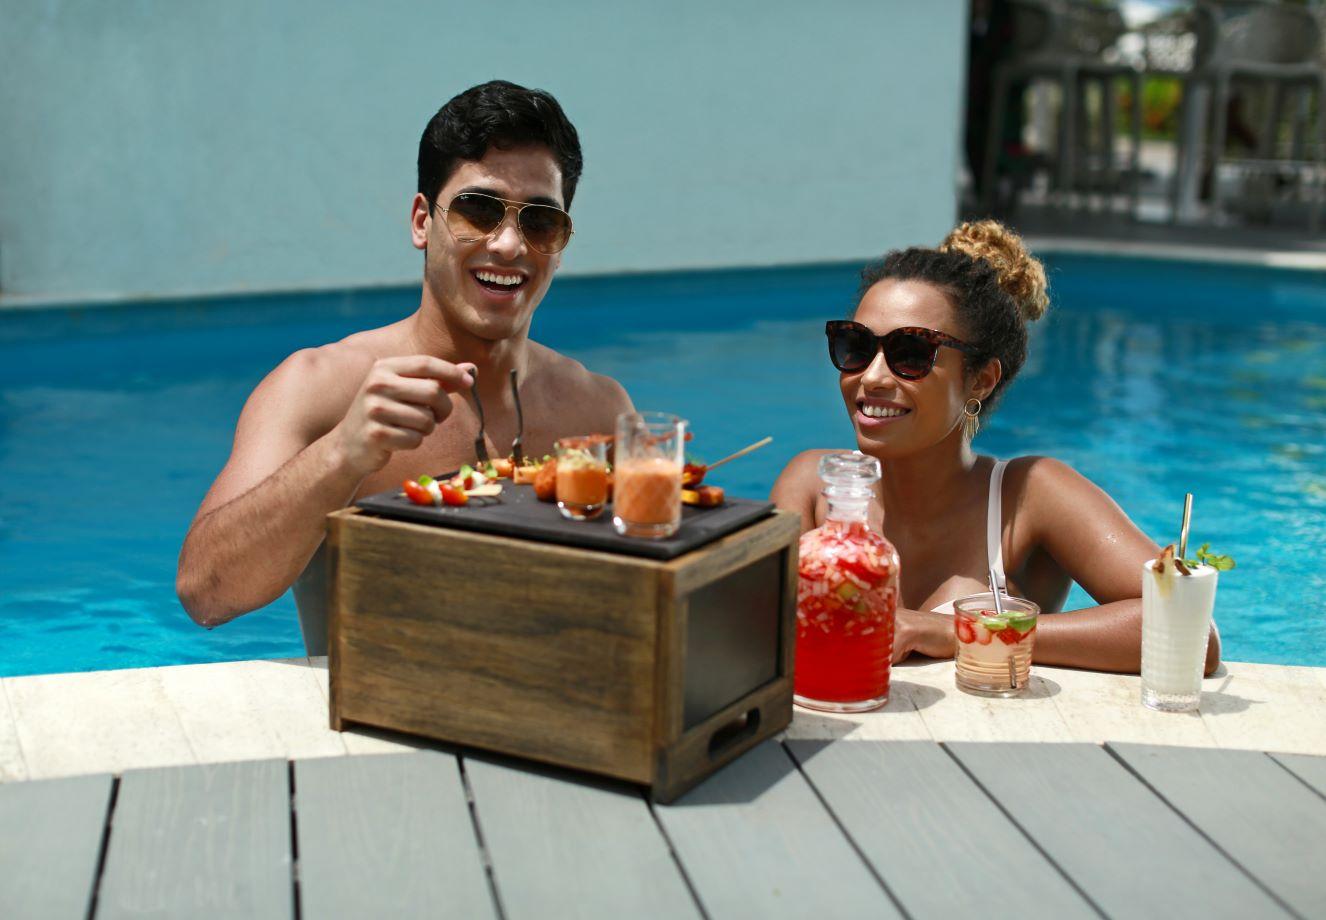 A couple in a pool enjoying food